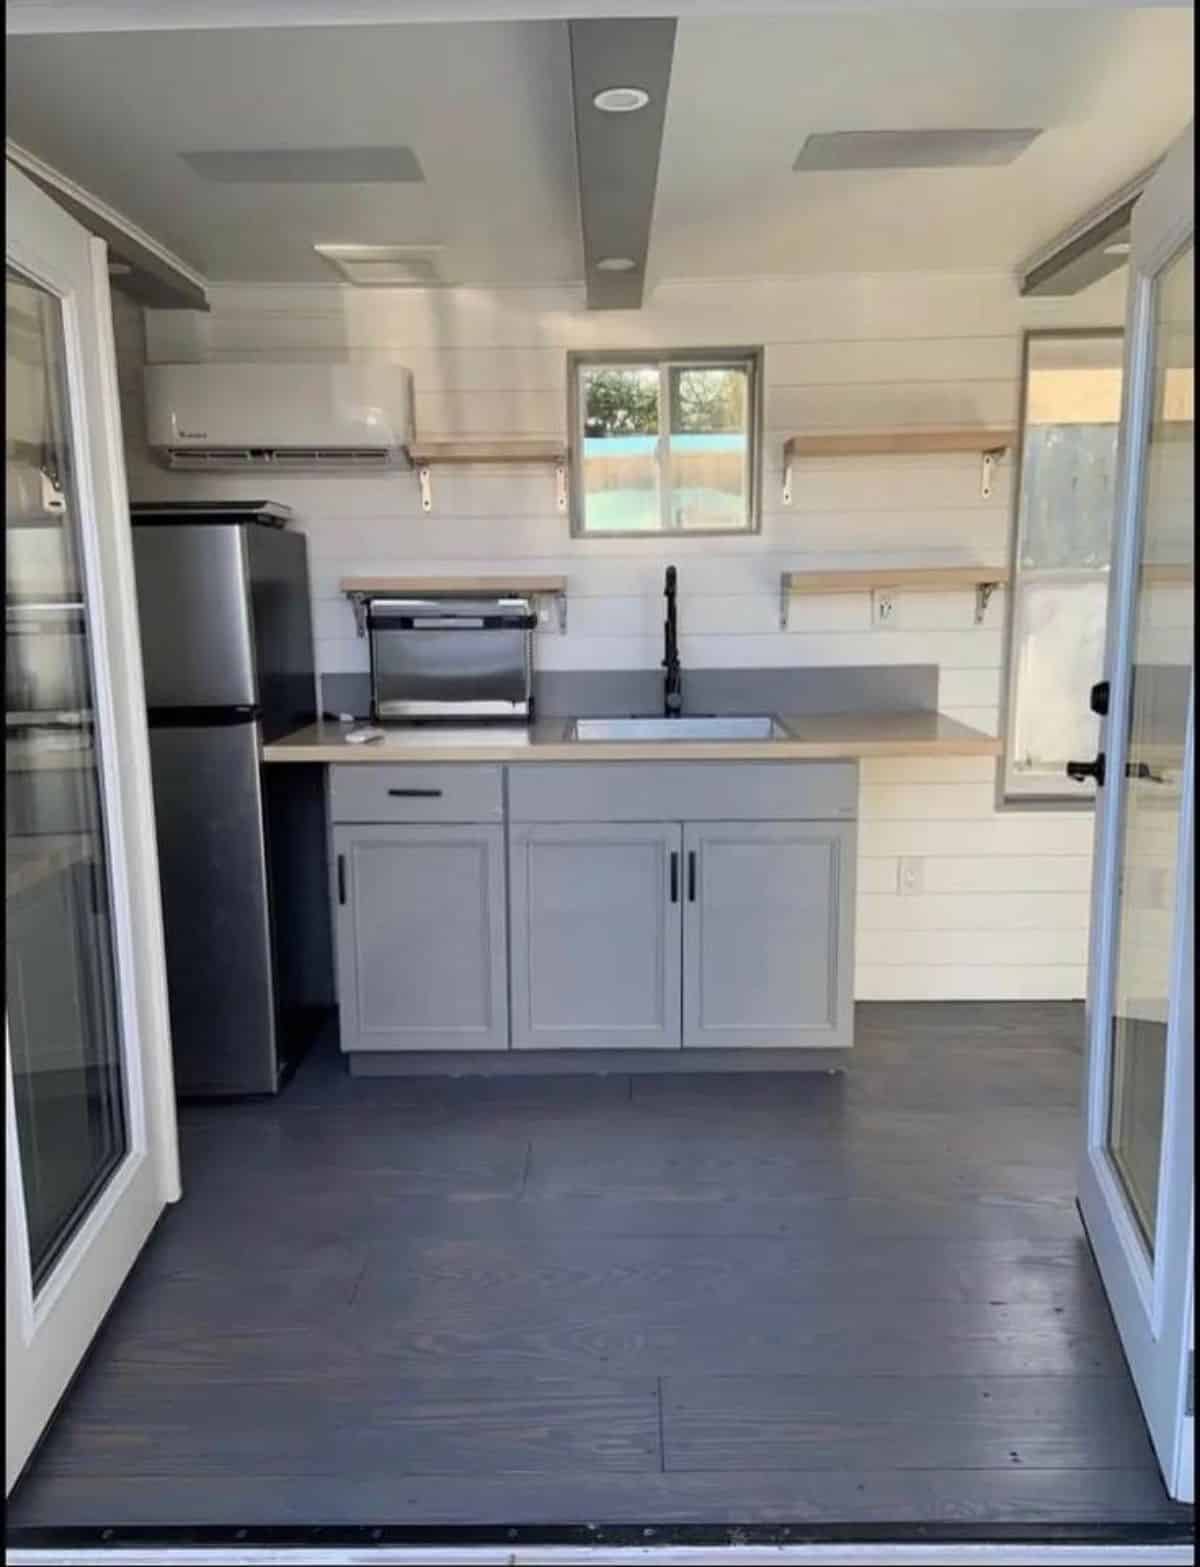 Kitchen area of solar powered tiny home